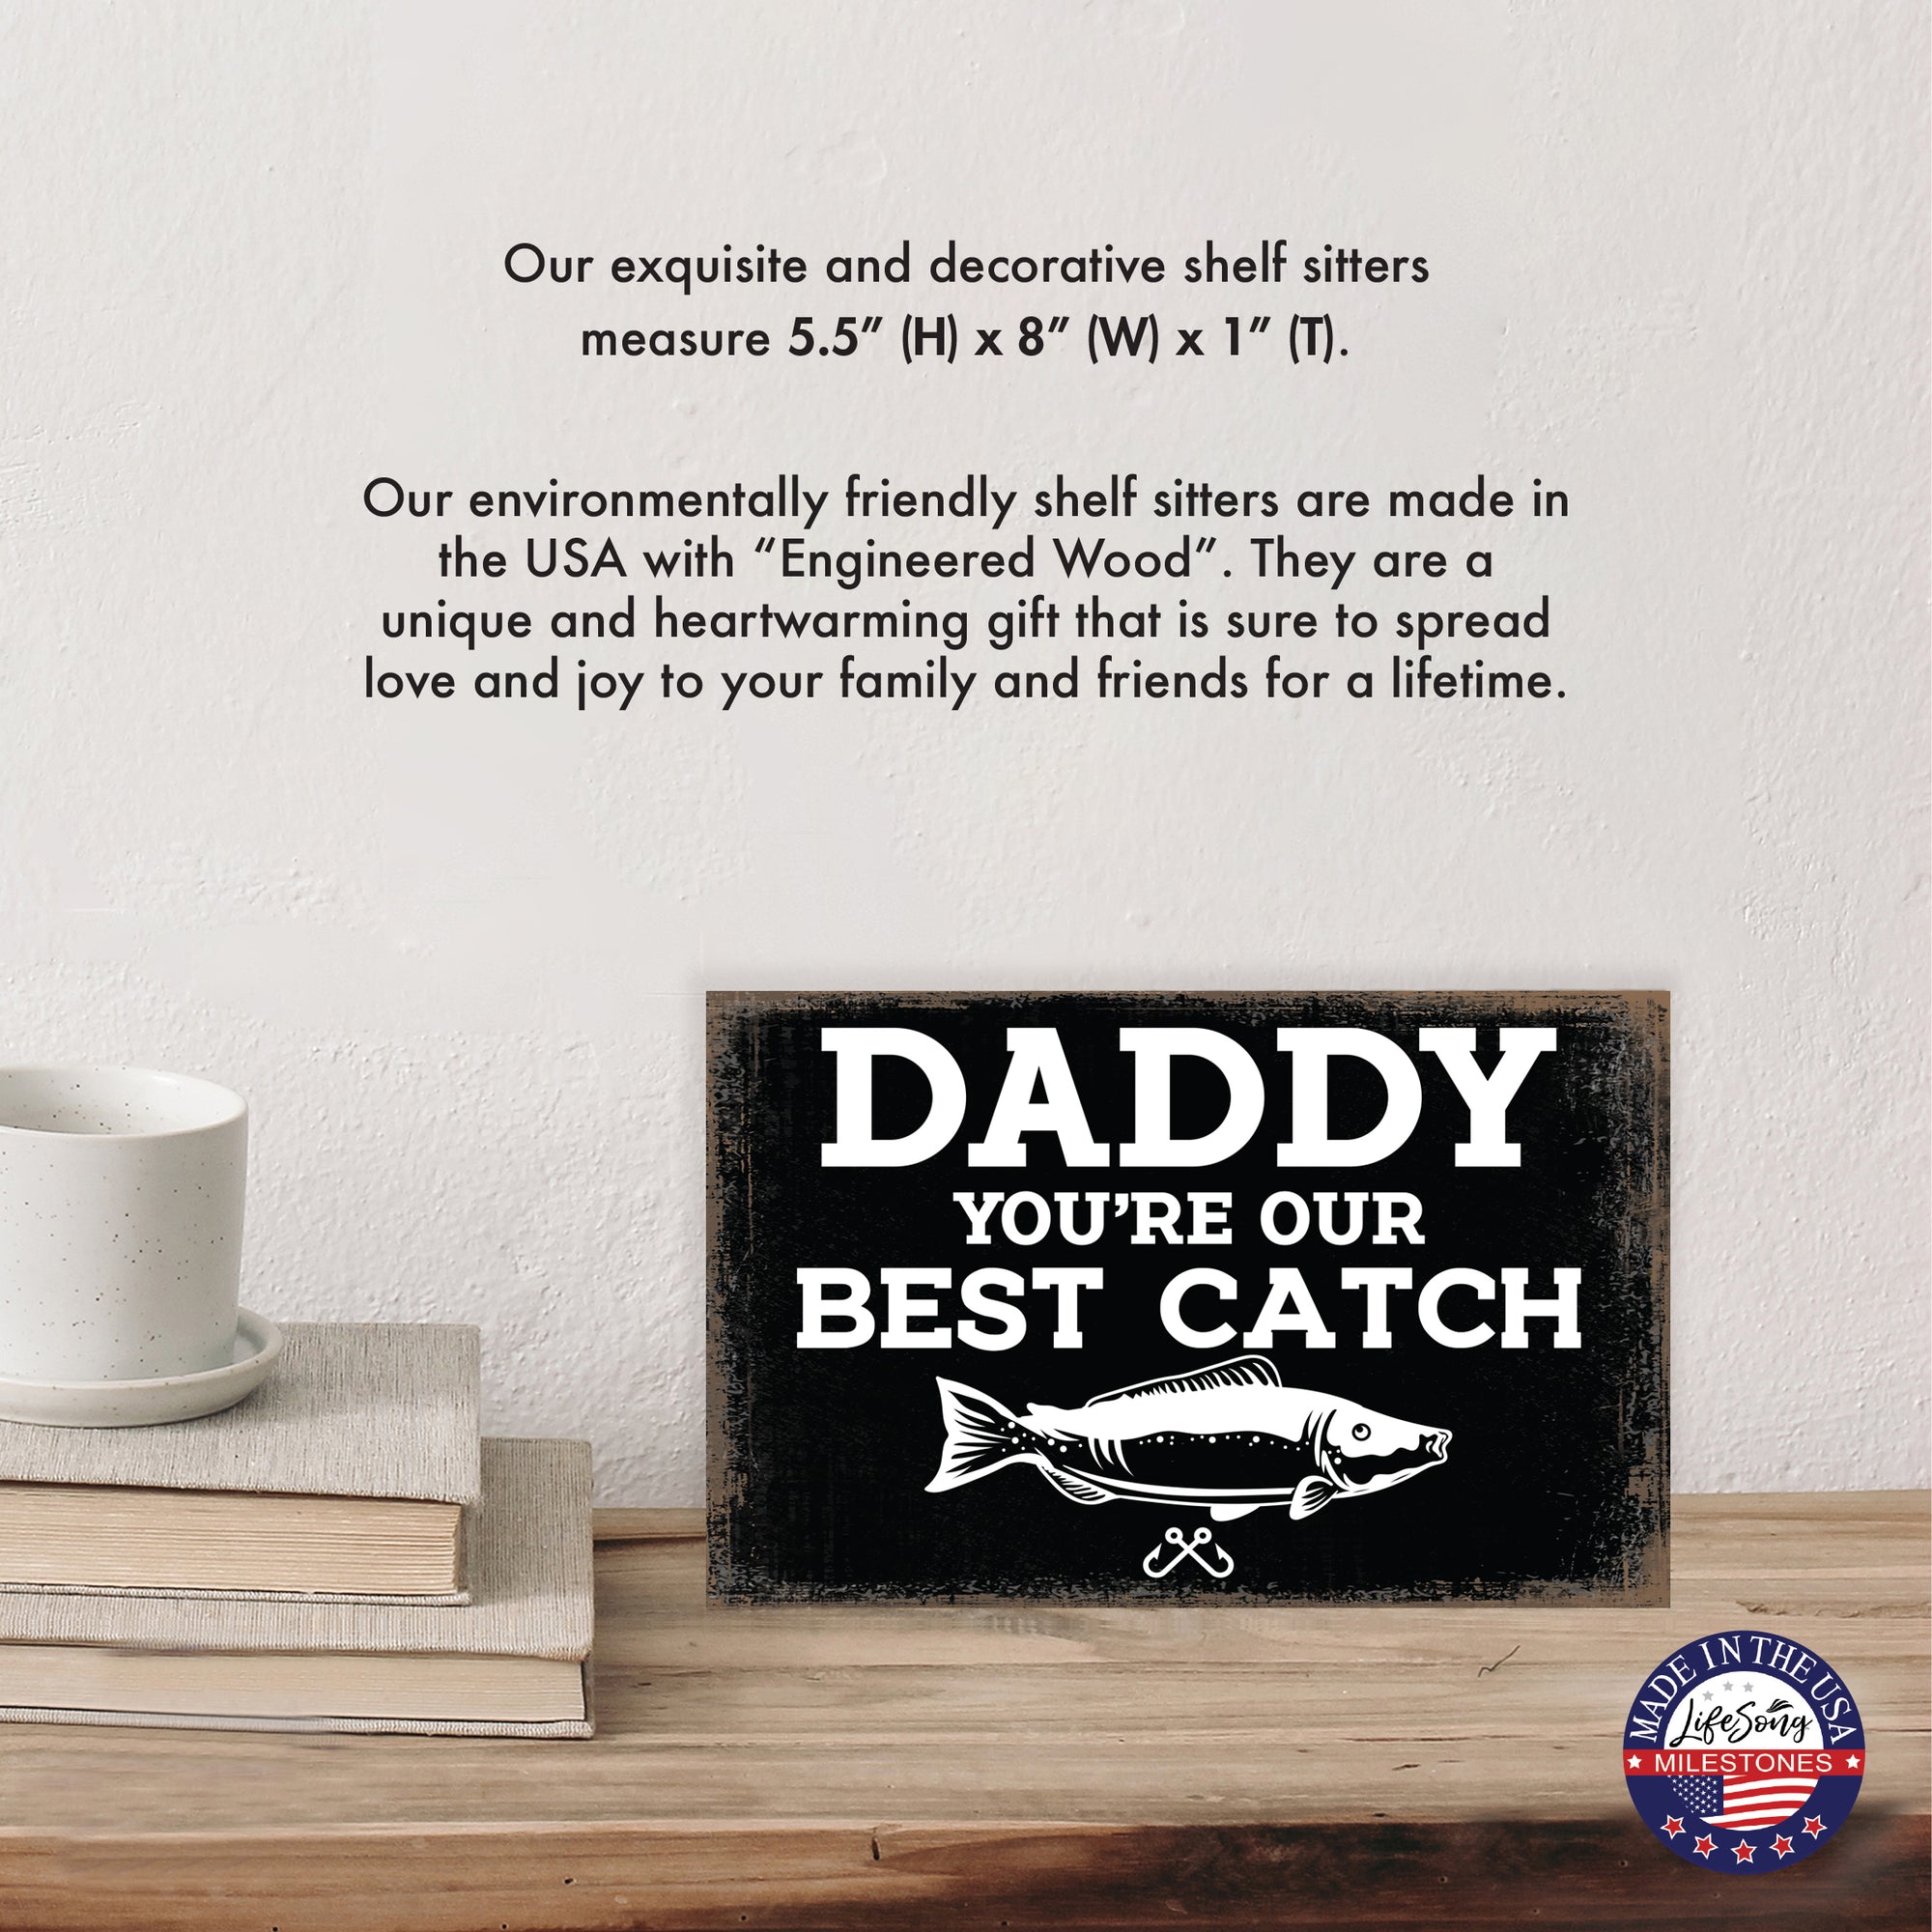 Wooden Tabletop for Dad: The Perfect Gift for Father’s Day and Wall Decor for Office.